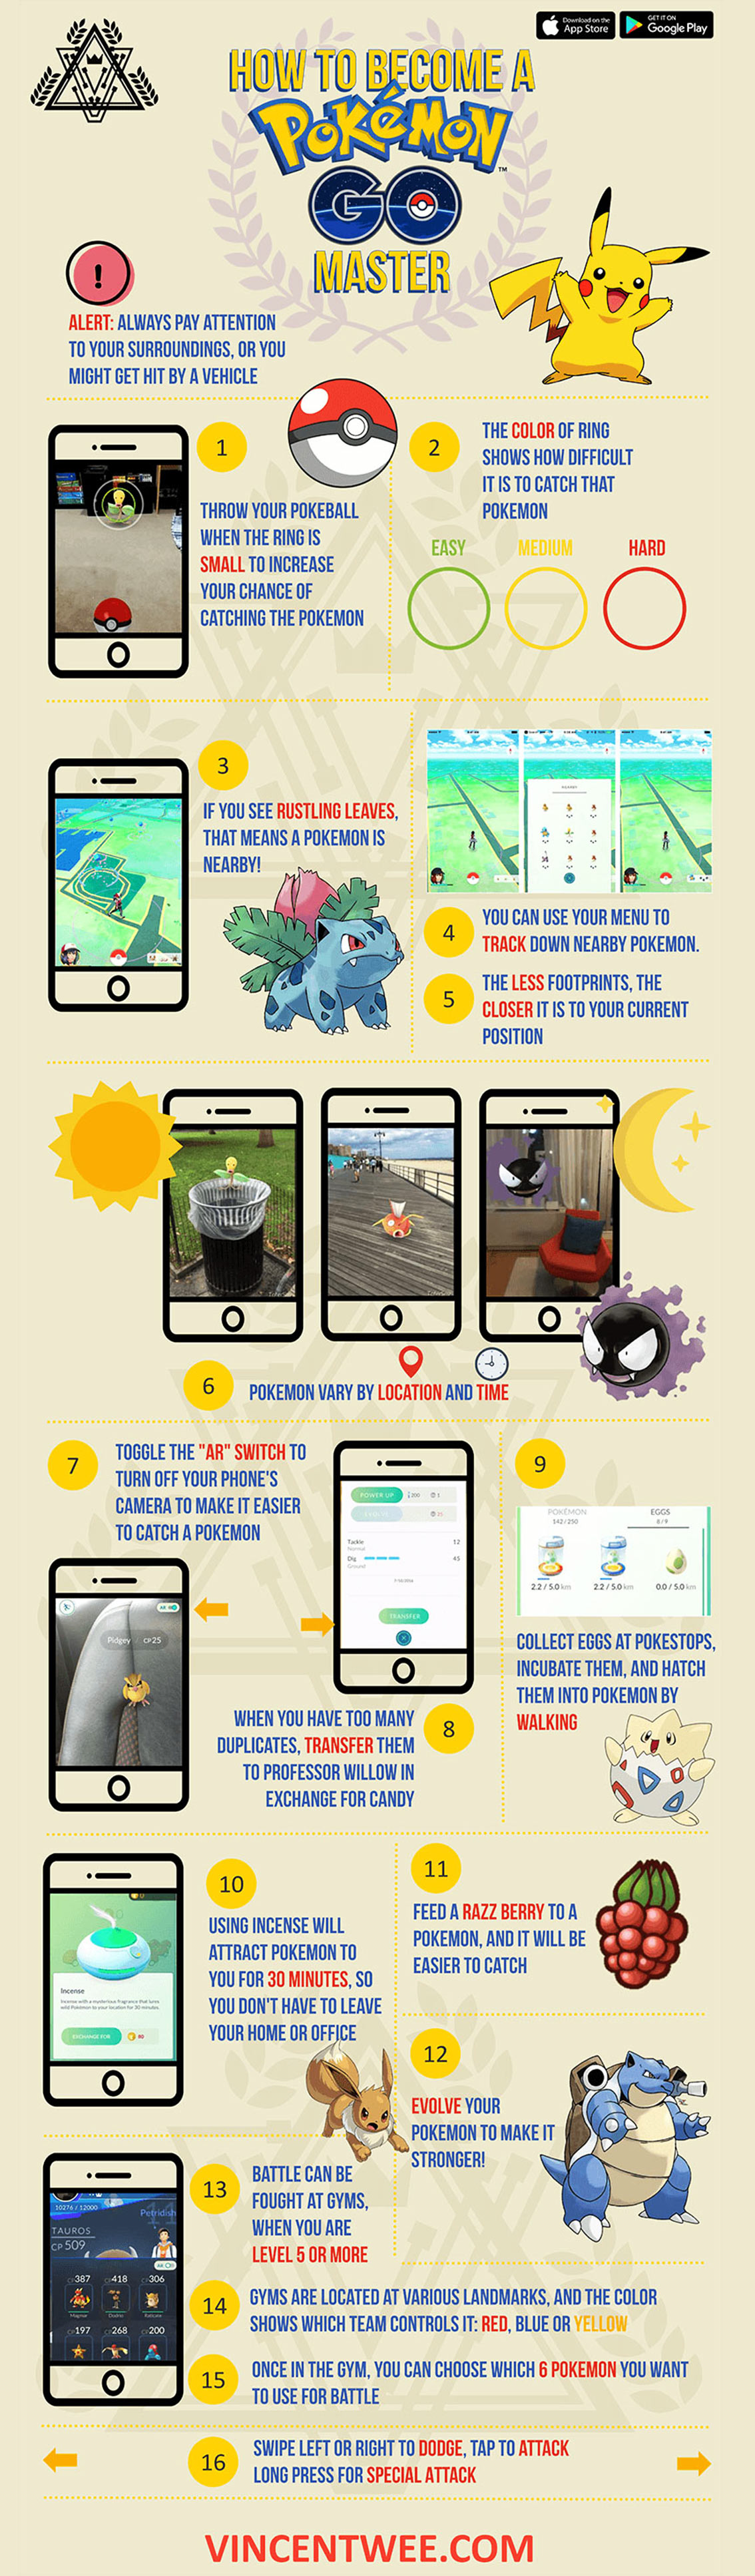 How to Become a Pokemon GO Master - Mobile Game Infographic